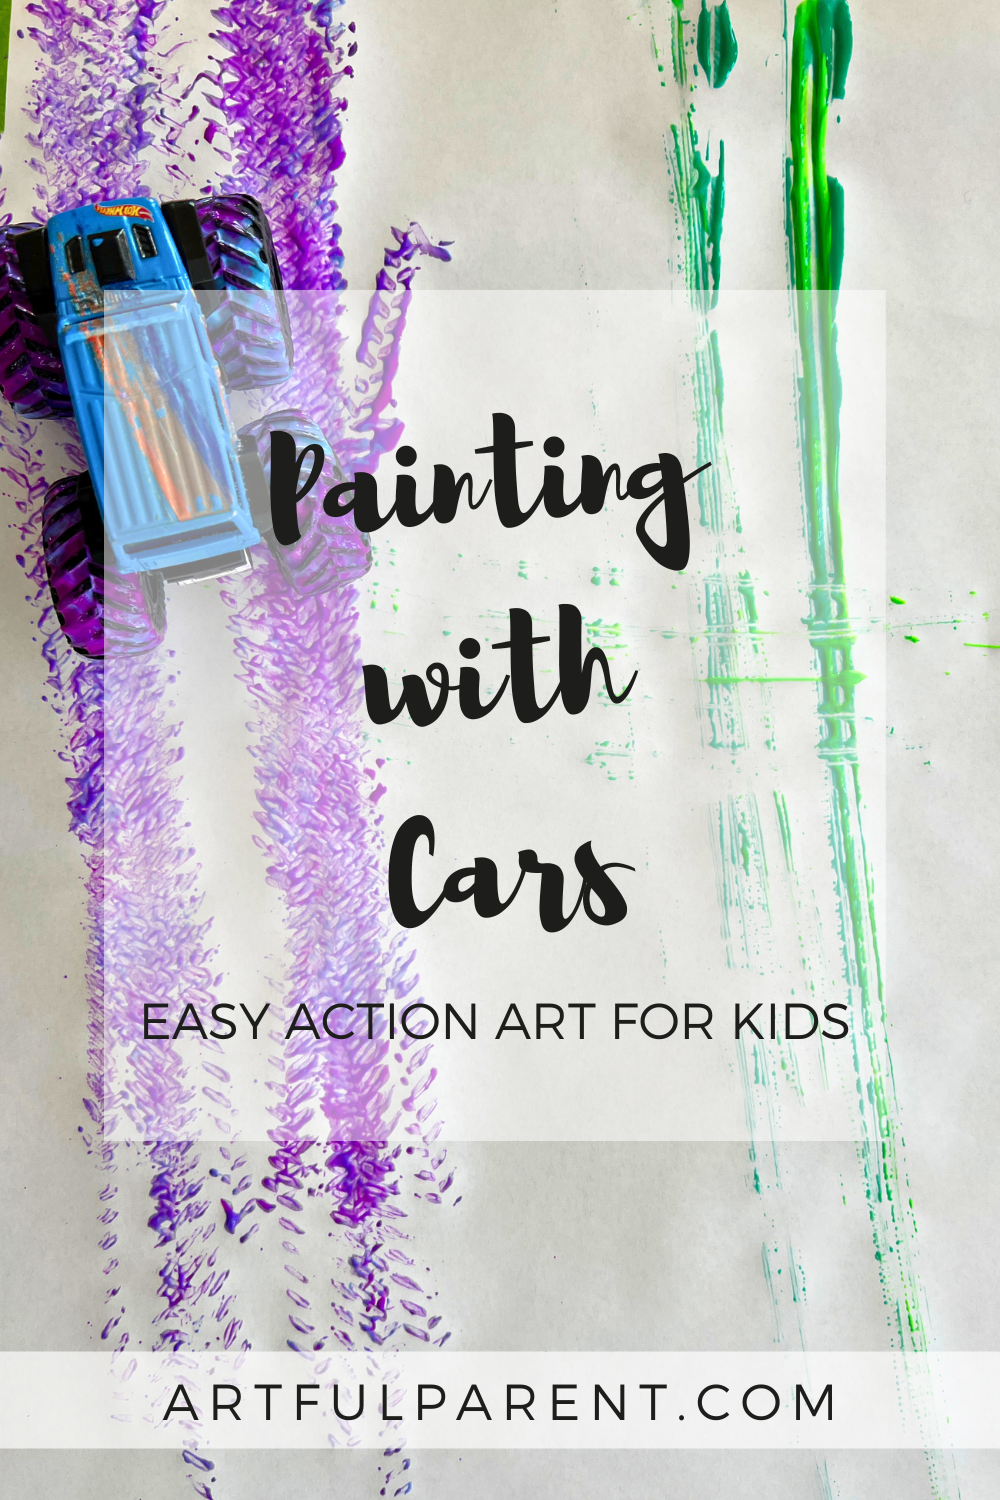 How to Paint with Cars: Easy Action Art for Kids